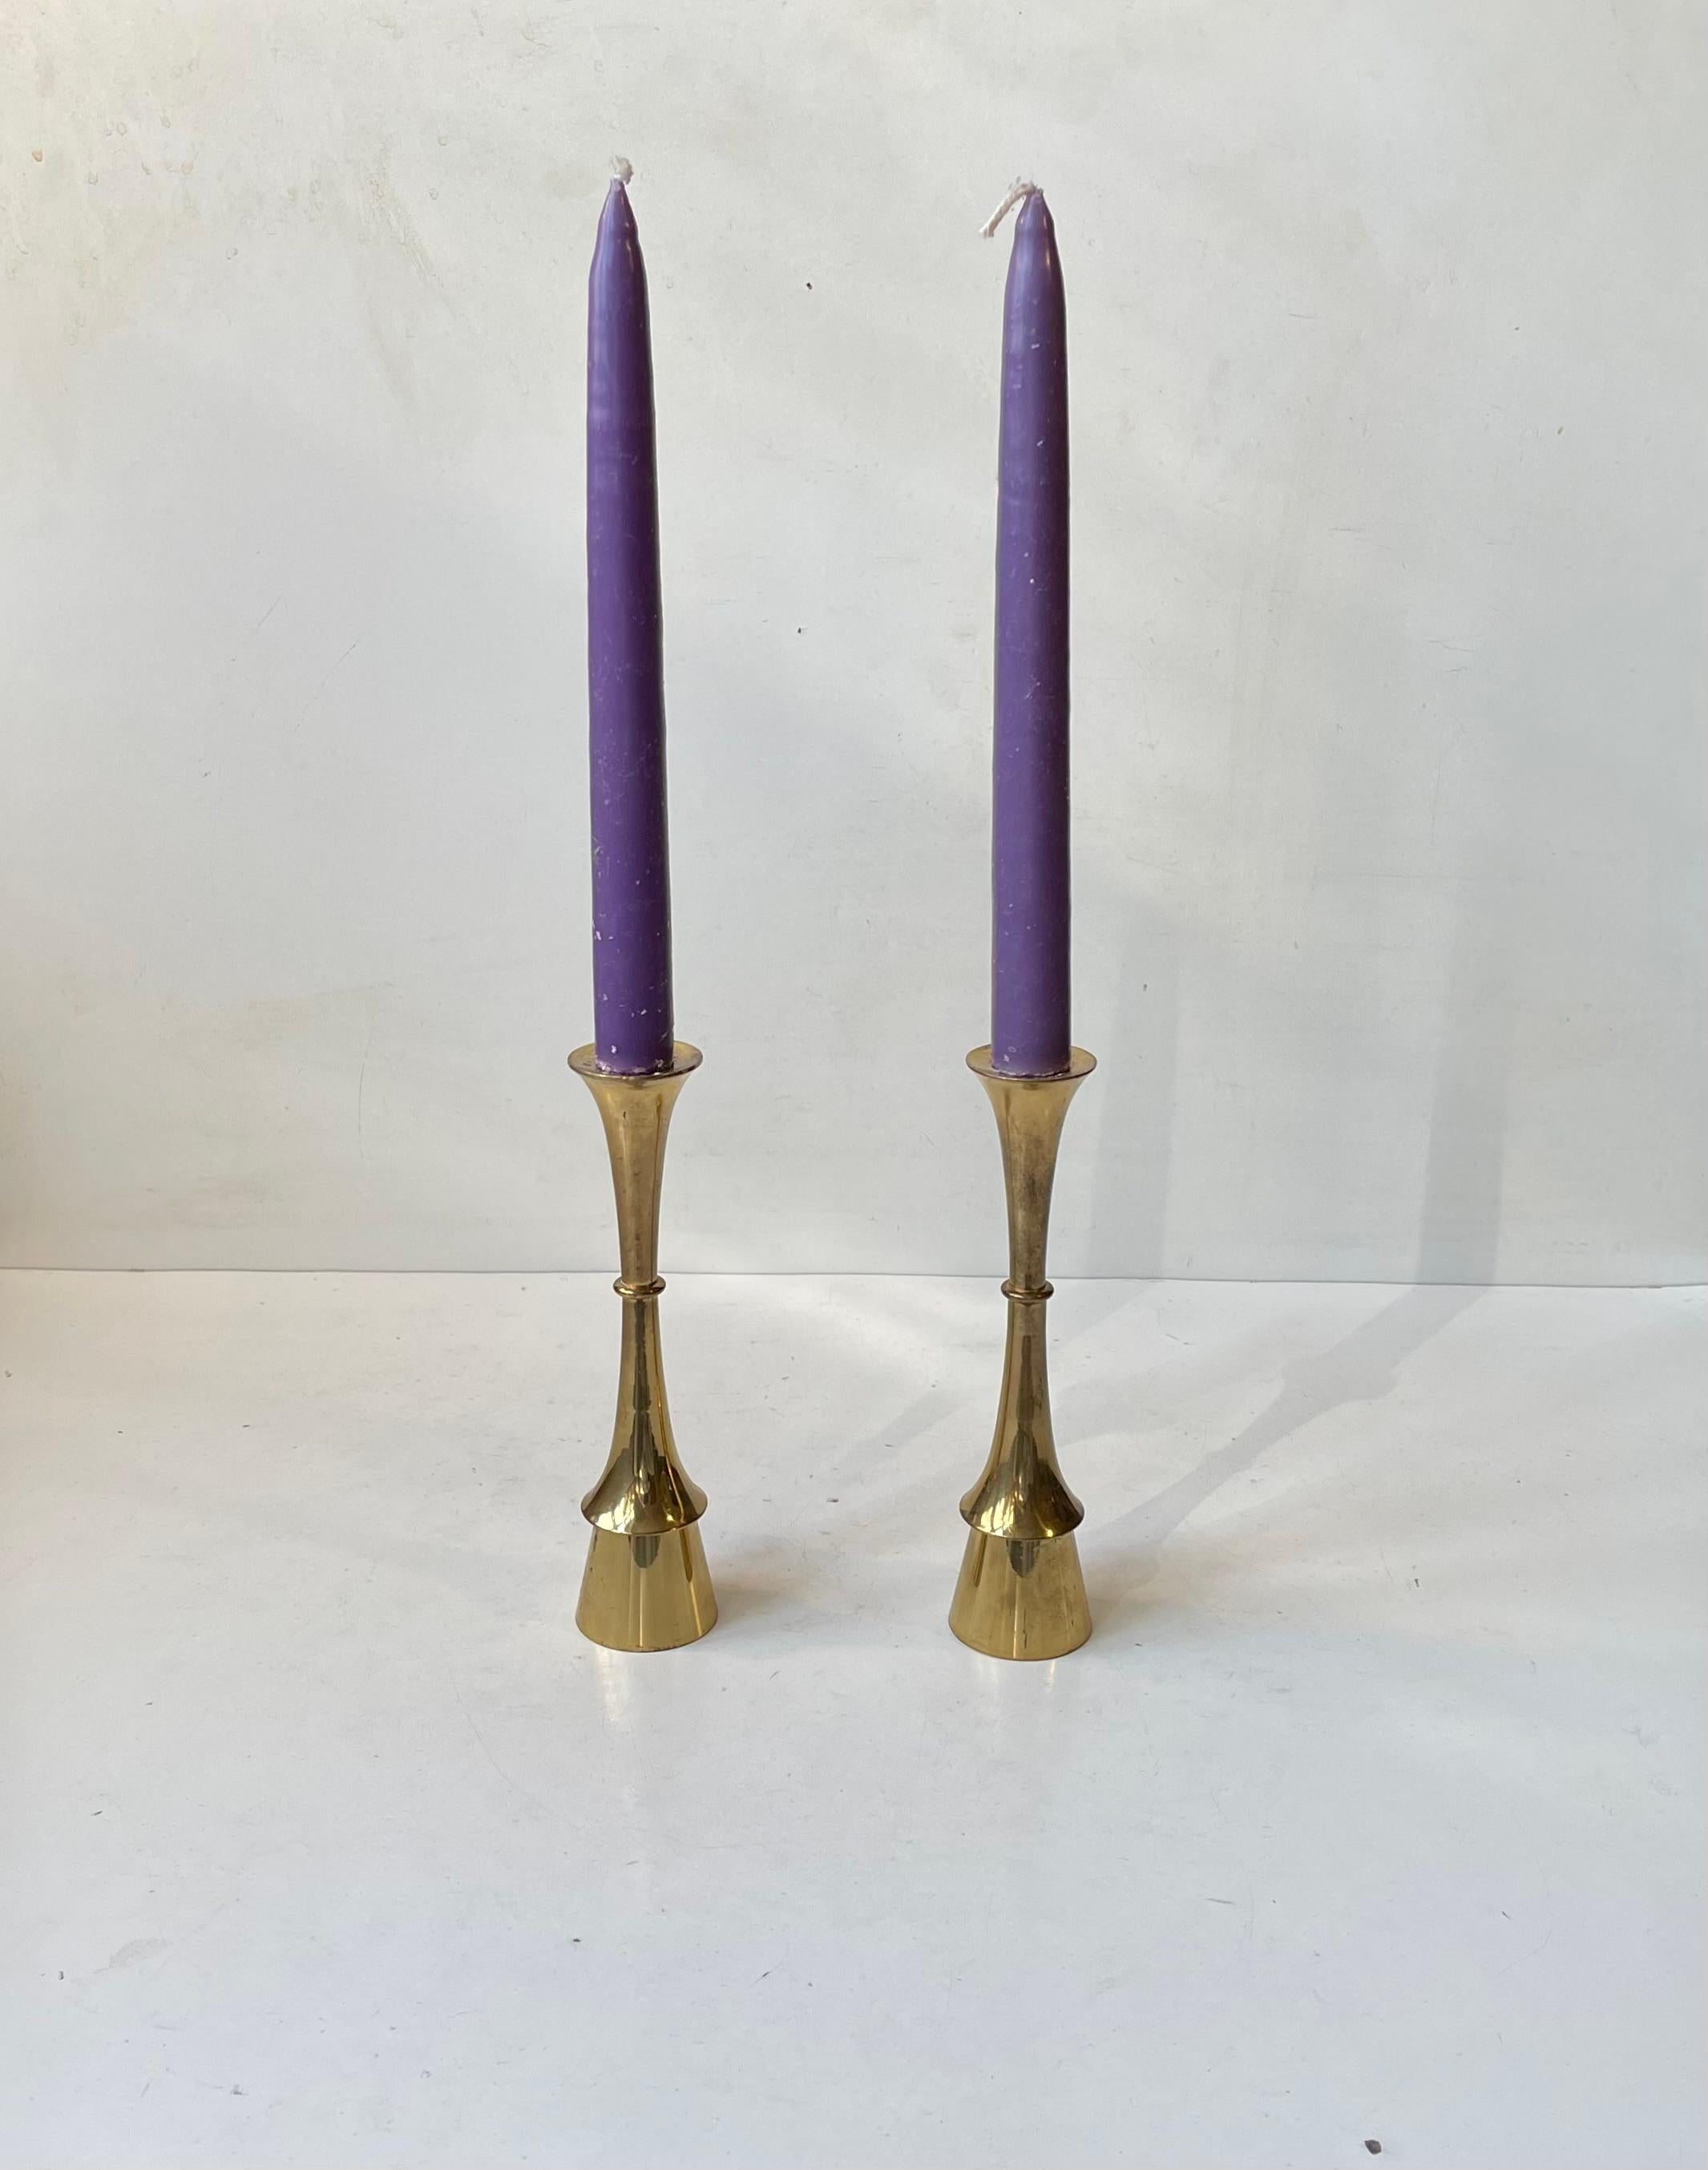 A pair of solid brass candlesticks designed and manufactured by Hyslop in Copenhagen, Denmark during the 1960s. The candlesticks are to be fitted with regular sized candles. They have not been polished recently and display patina. The style of this